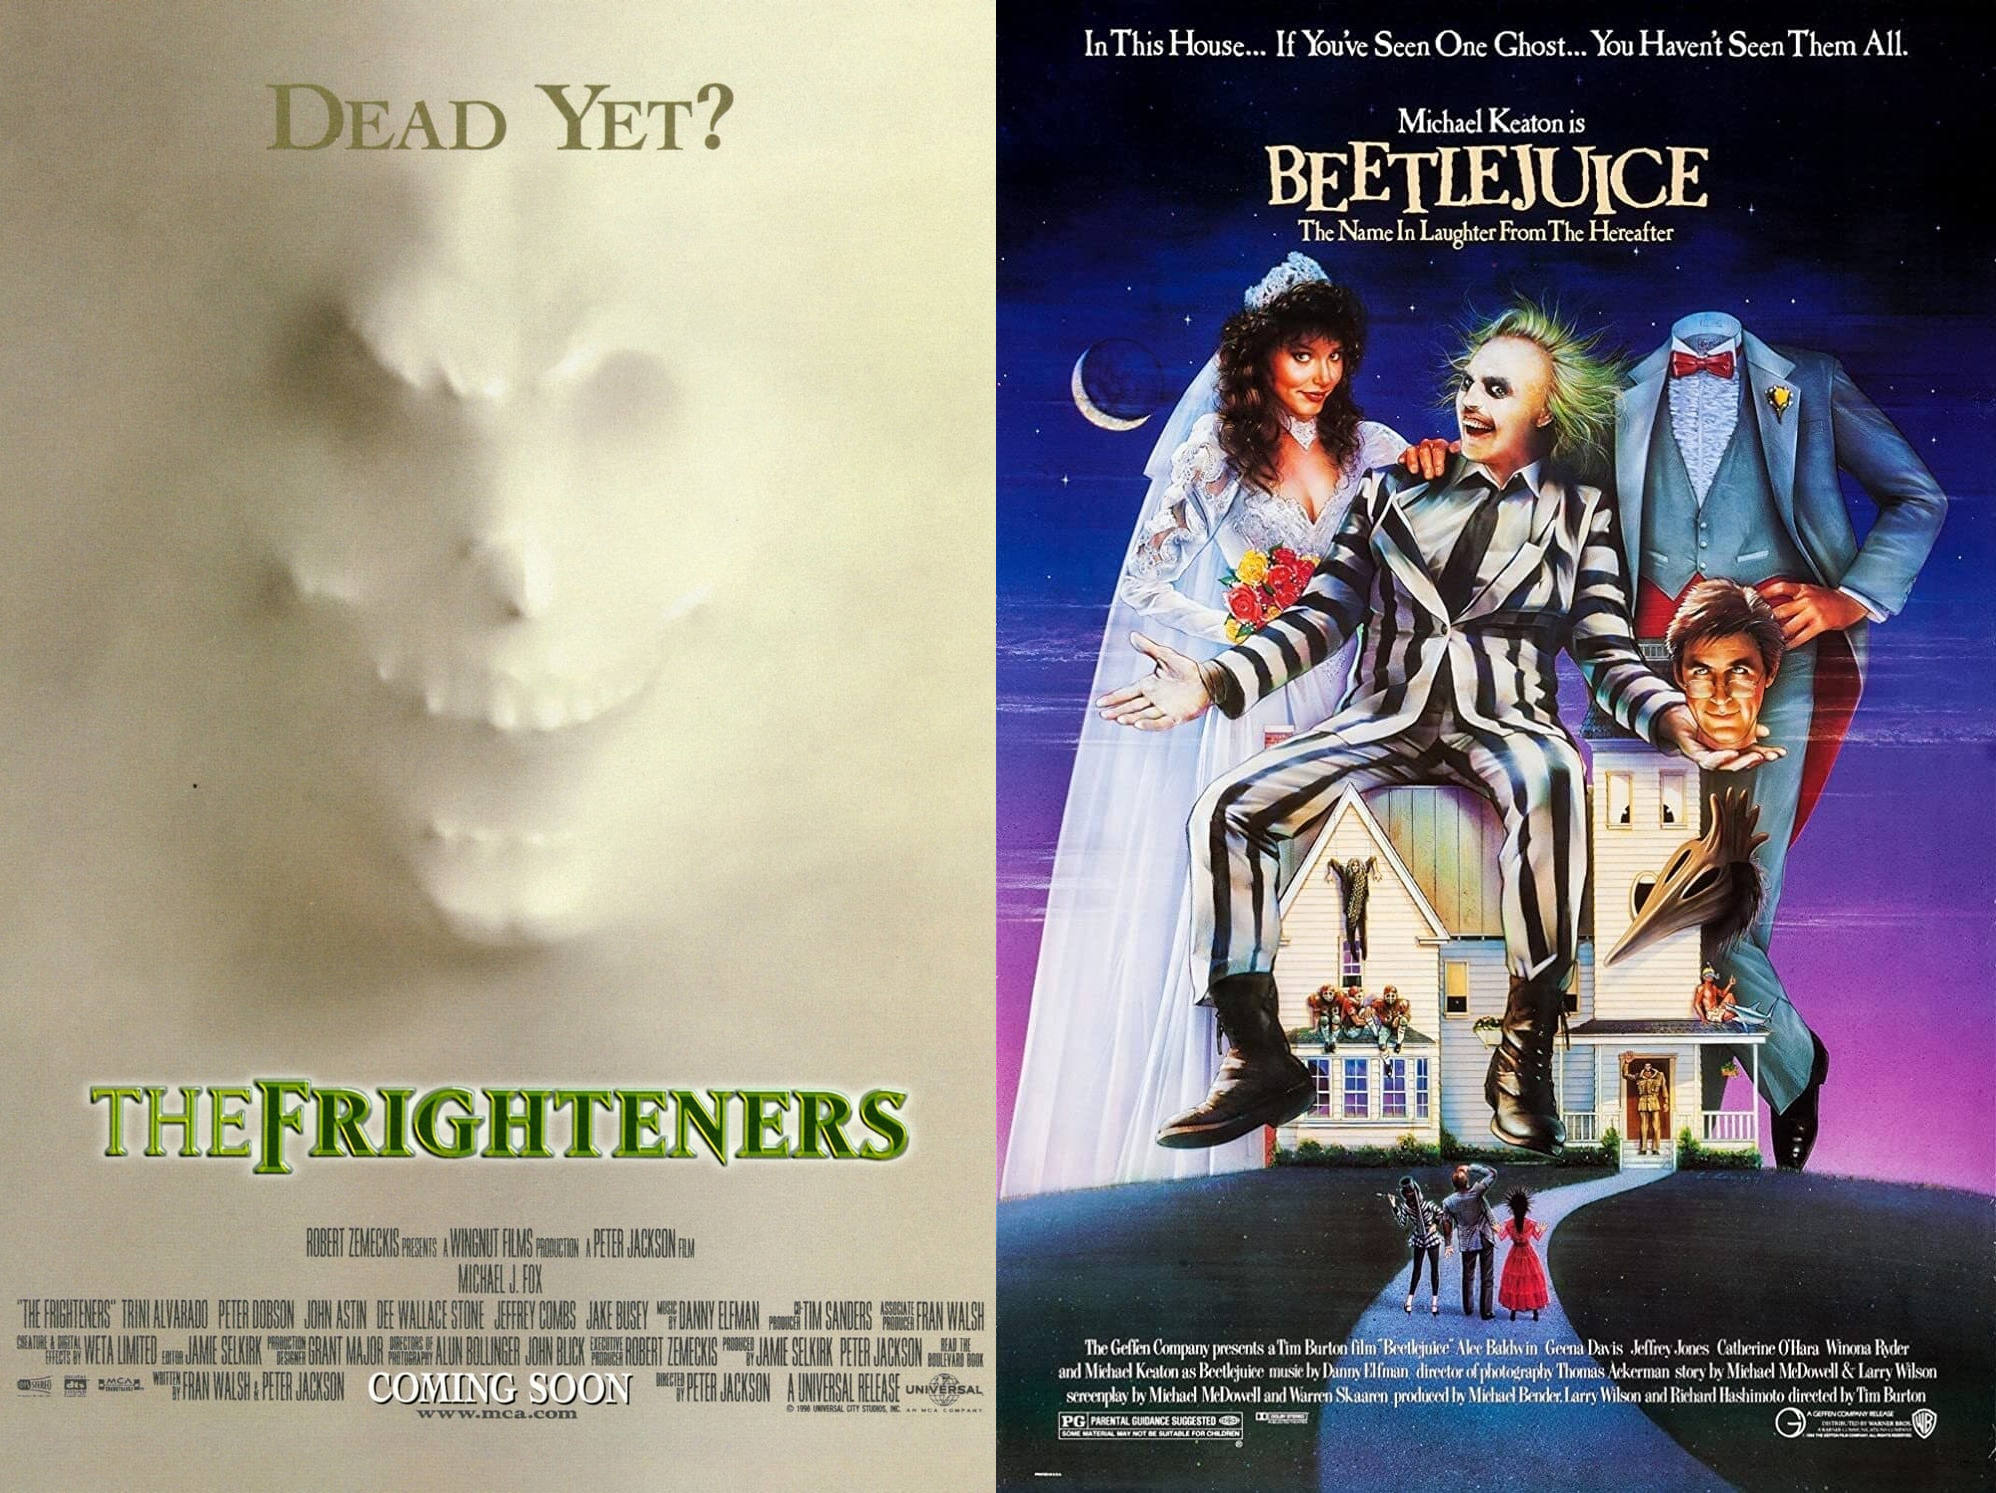 Ghostbusters… no, not *those* guys (THE FRIGHTENERS & BEETLEJUICE)